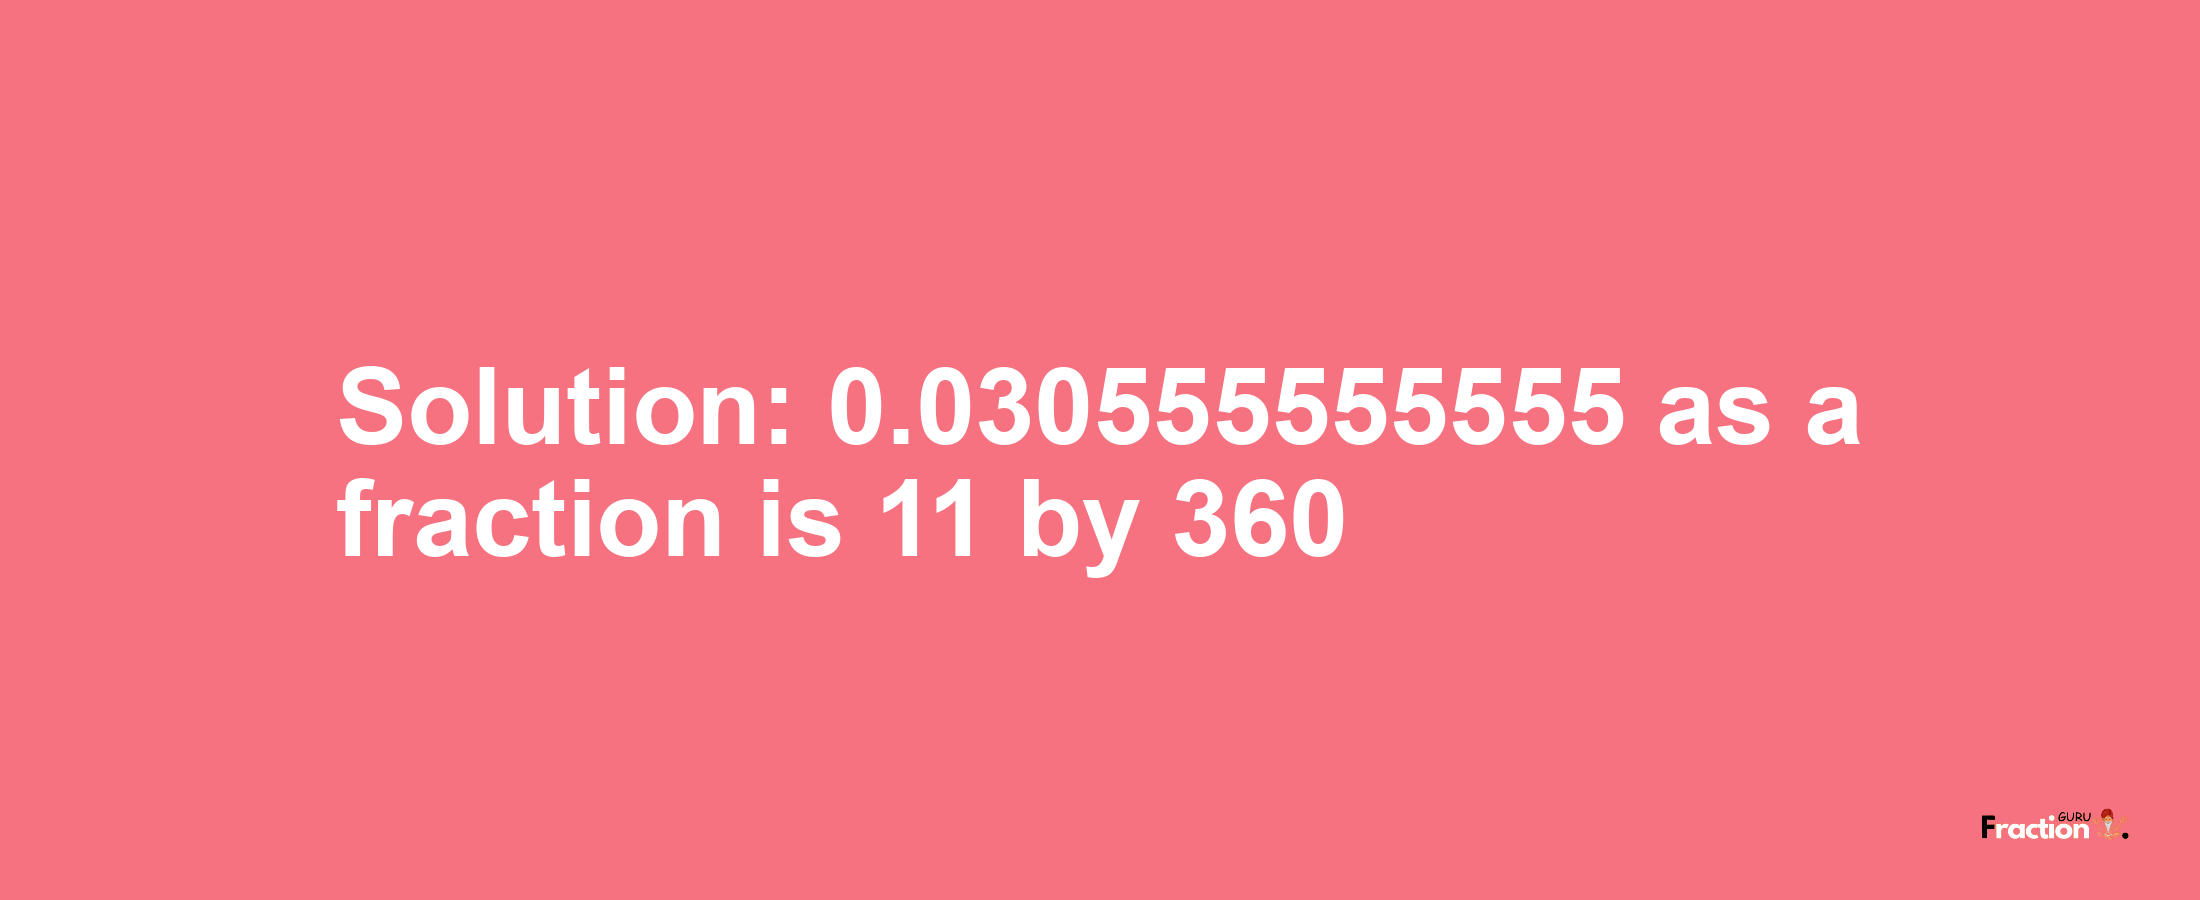 Solution:0.030555555555 as a fraction is 11/360